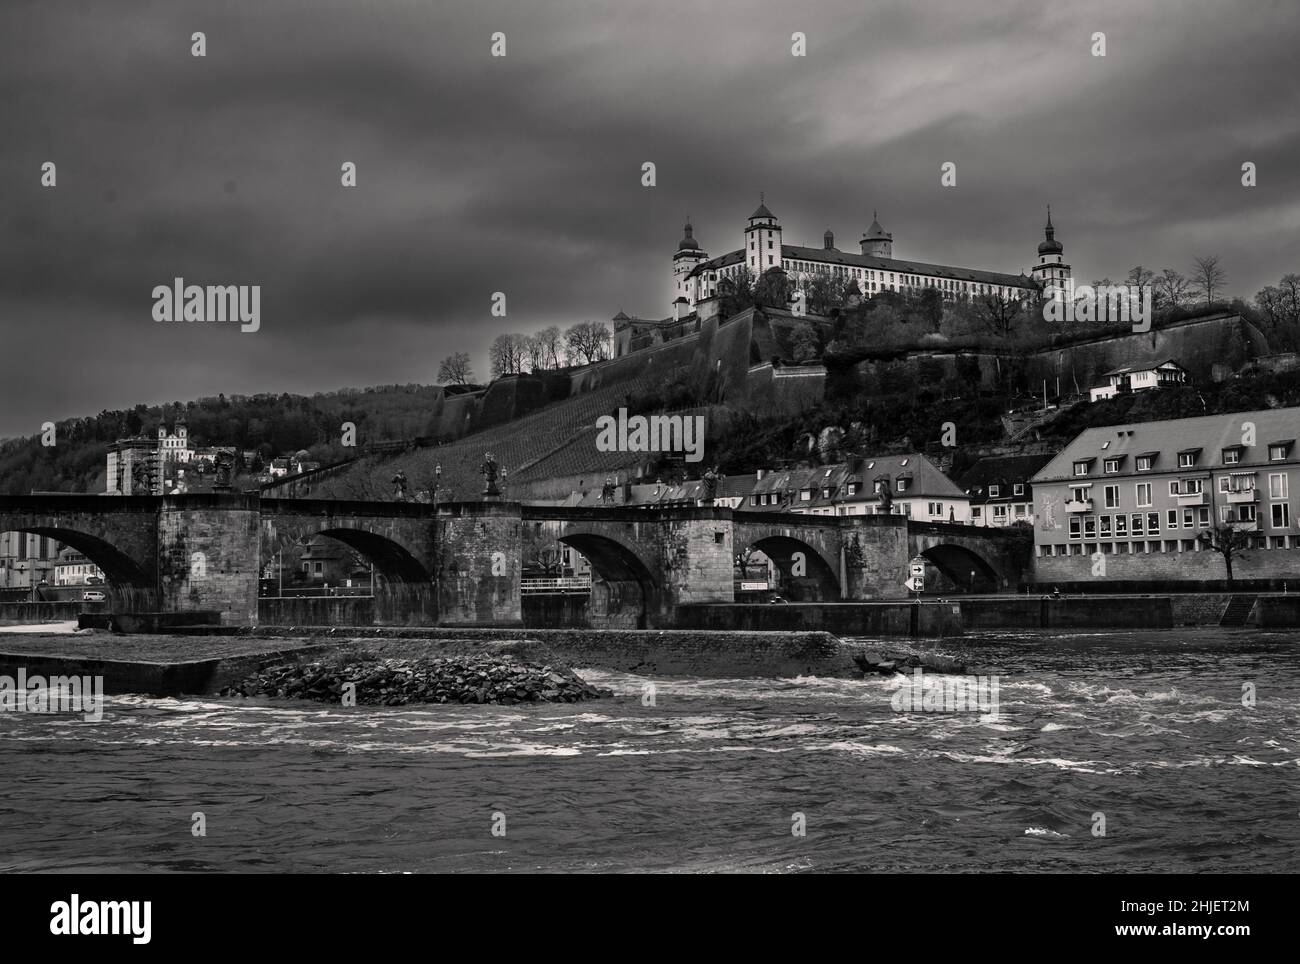 Marienberg Fortress and Old Main Bridge Cityscape in Wurzburg, Germany in Monochrome Black and White Stock Photo